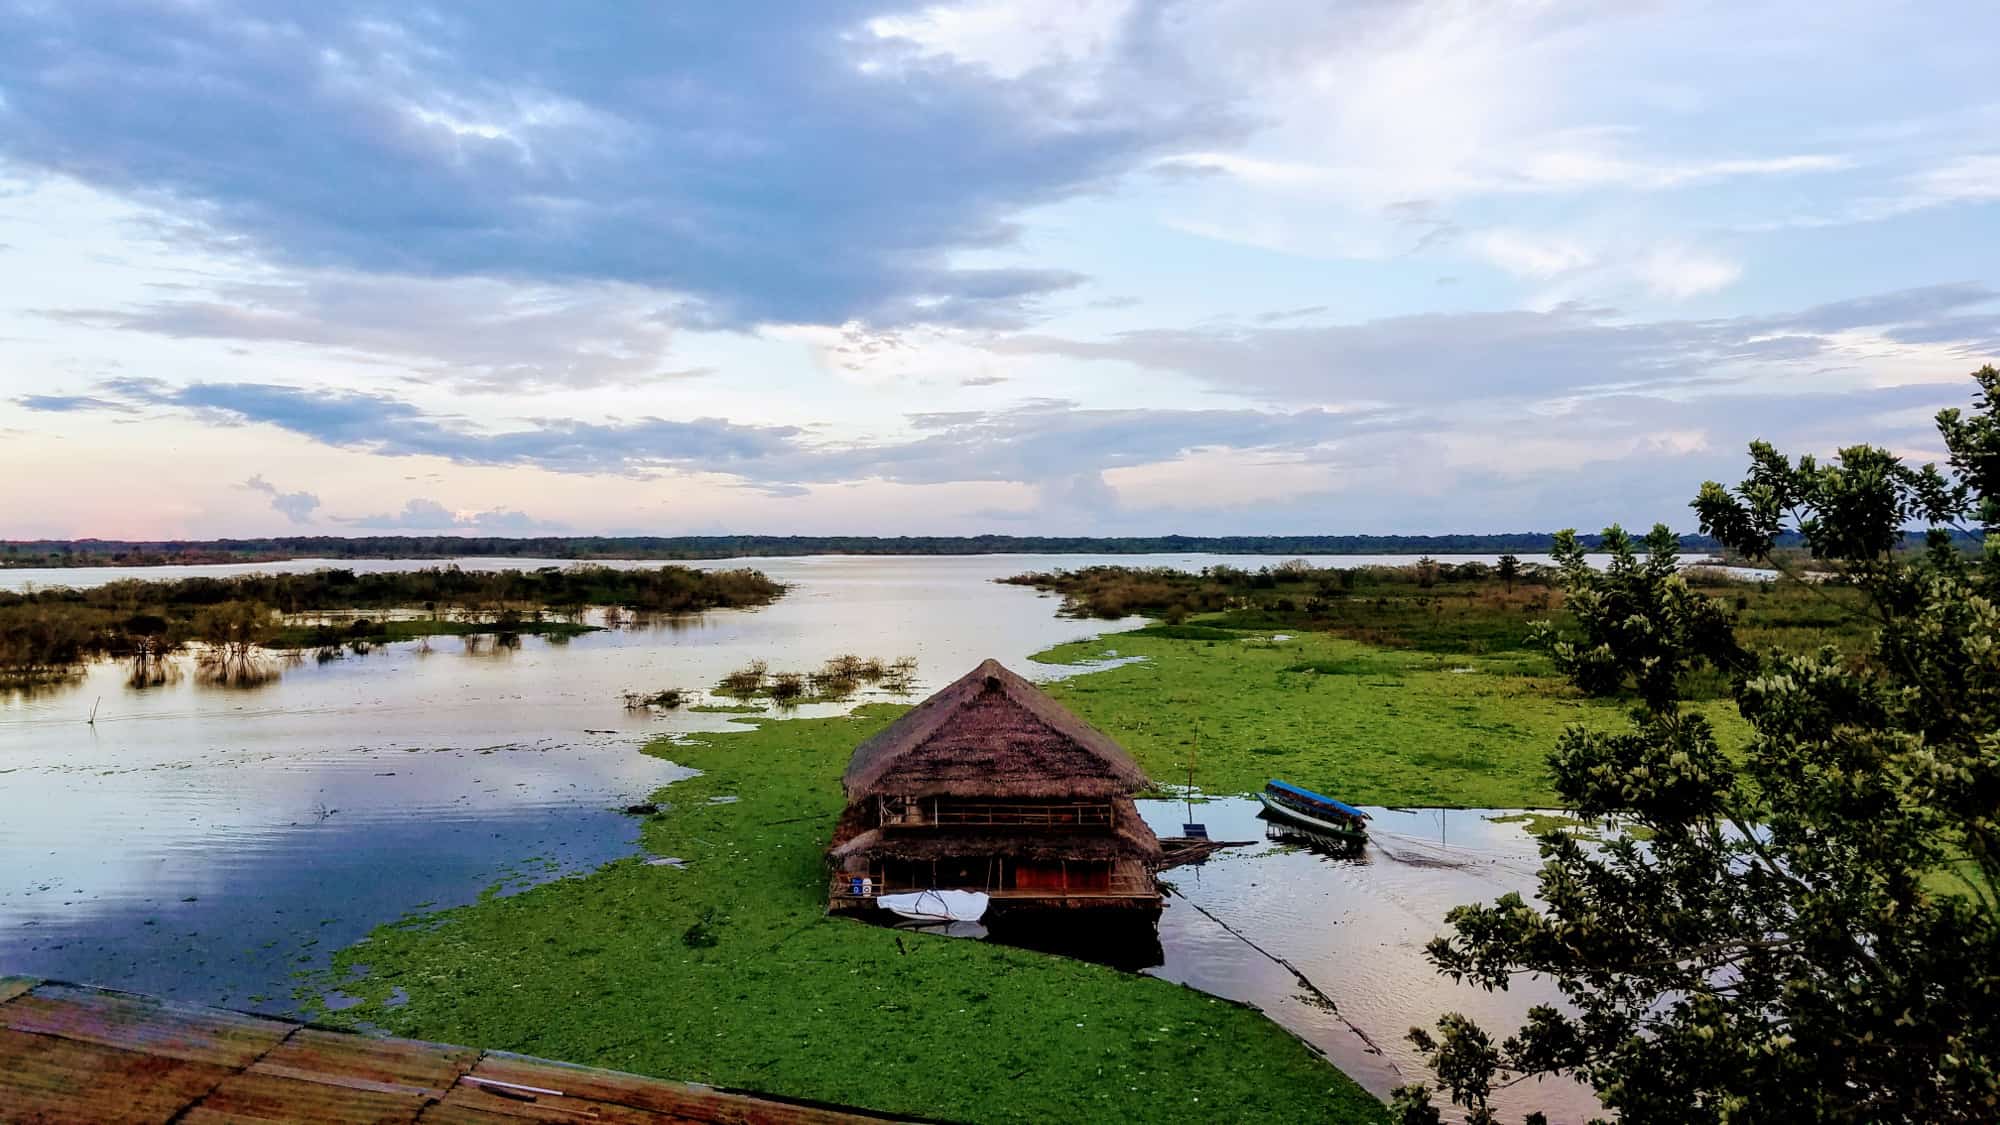 The Edge of Iquitos